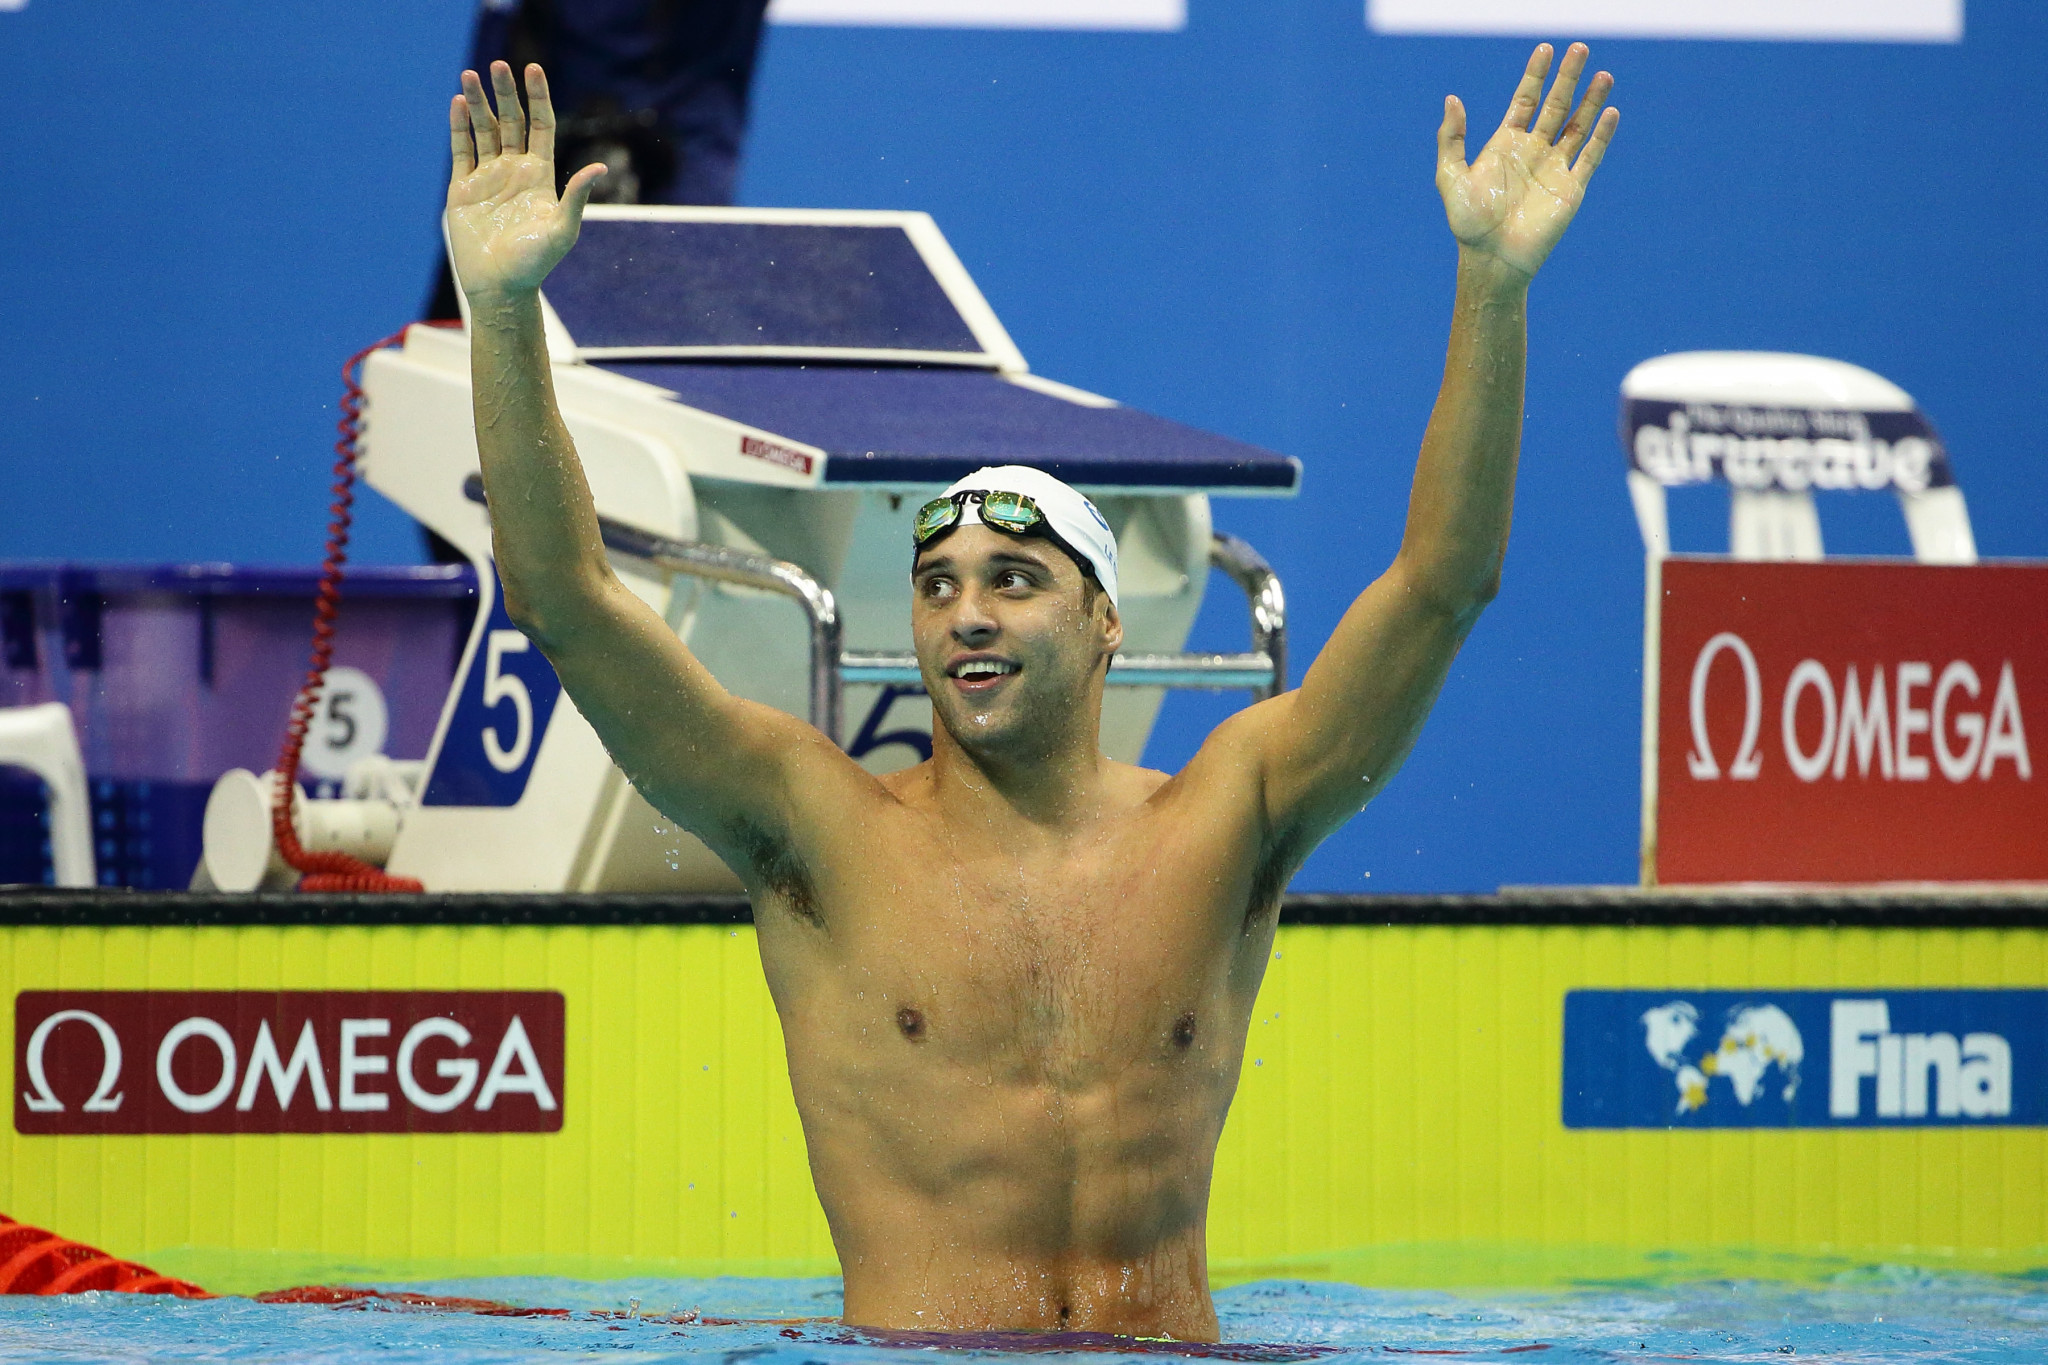 Le Clos offers to pay for team-mates' participation at Gold Coast 2018 as he chases medal record